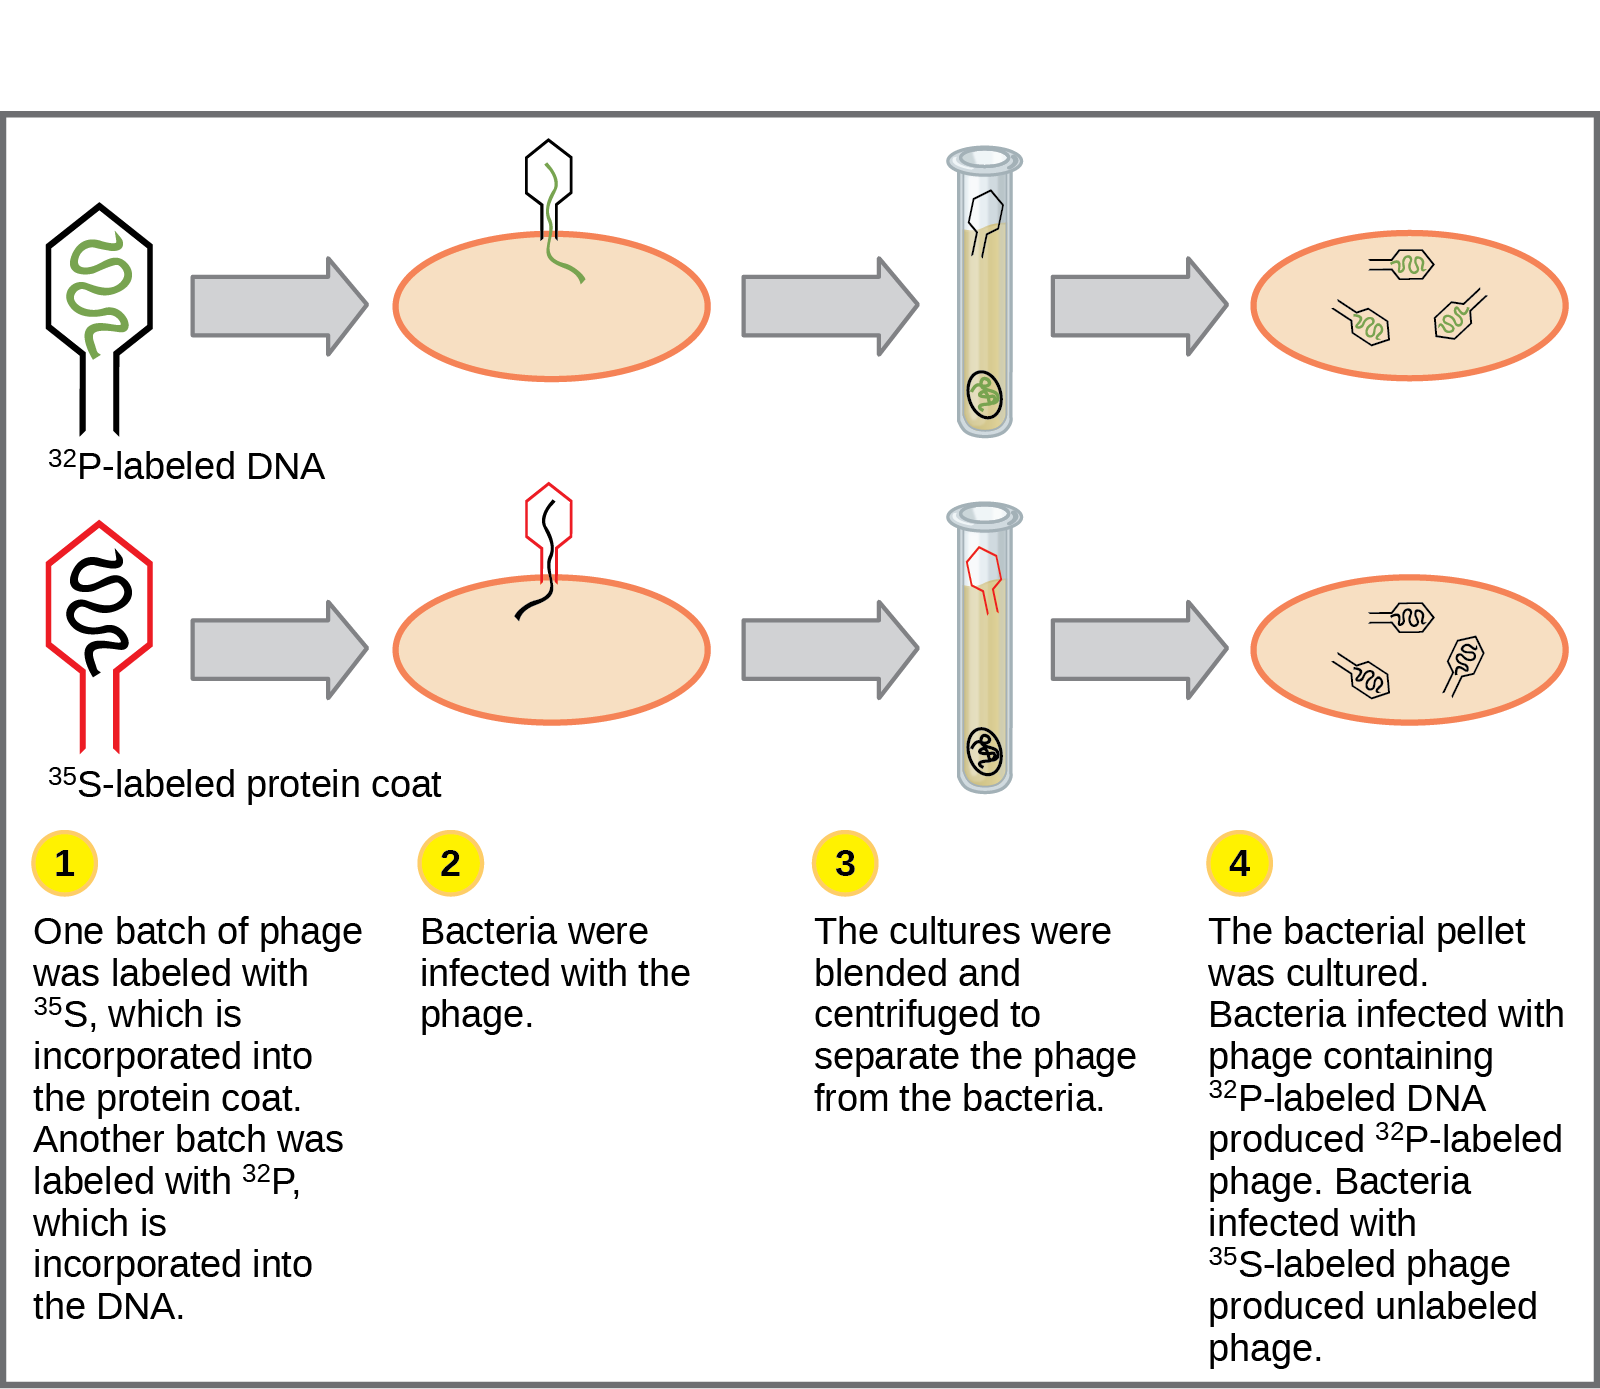 Illustration shows bacteria being infected by phage labeled with superscript 35 baseline upper case S, which is incorporated into the protein coat, or superscript 32 baseline upper case P, which is incorporated into the D N A. Infected bacteria were separated from phage by centrifugation and cultured. The bacteria that had been infected with phage containing superscript 32 baseline upper P labeled D N A made radioactive phage. The bacteria that had been infected with superscript 35 baseline upper S labeled phage produced unlabeled phage. The results support the hypothesis that D N A, and not protein, is the genetic material.